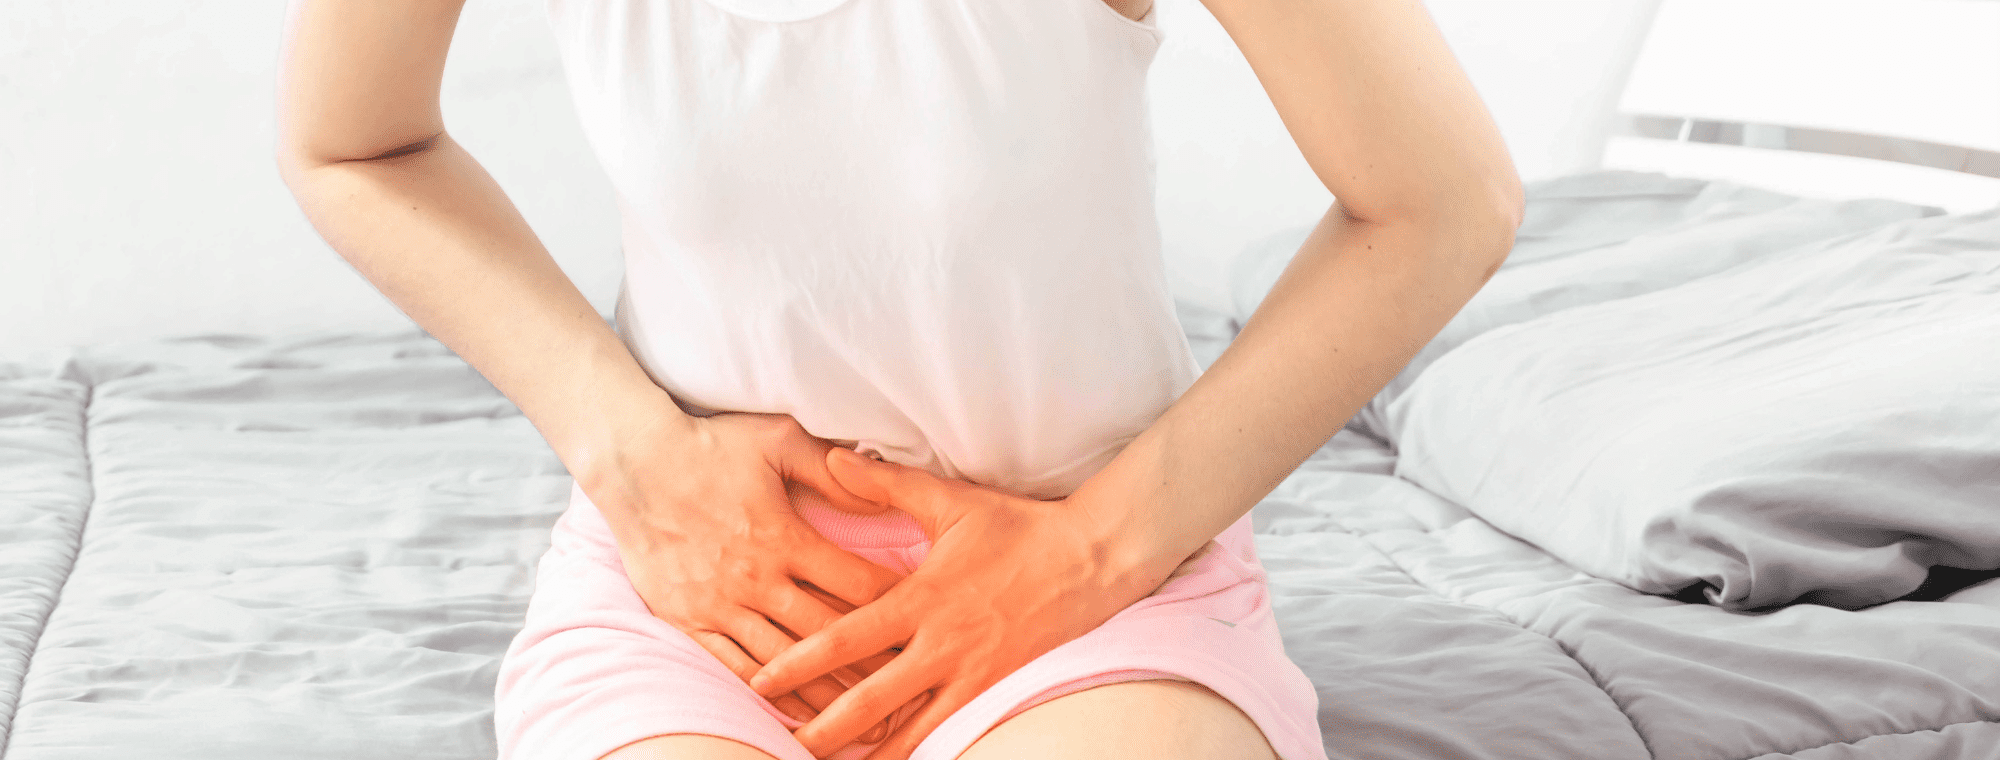 Treatment Options For Heavy Periods